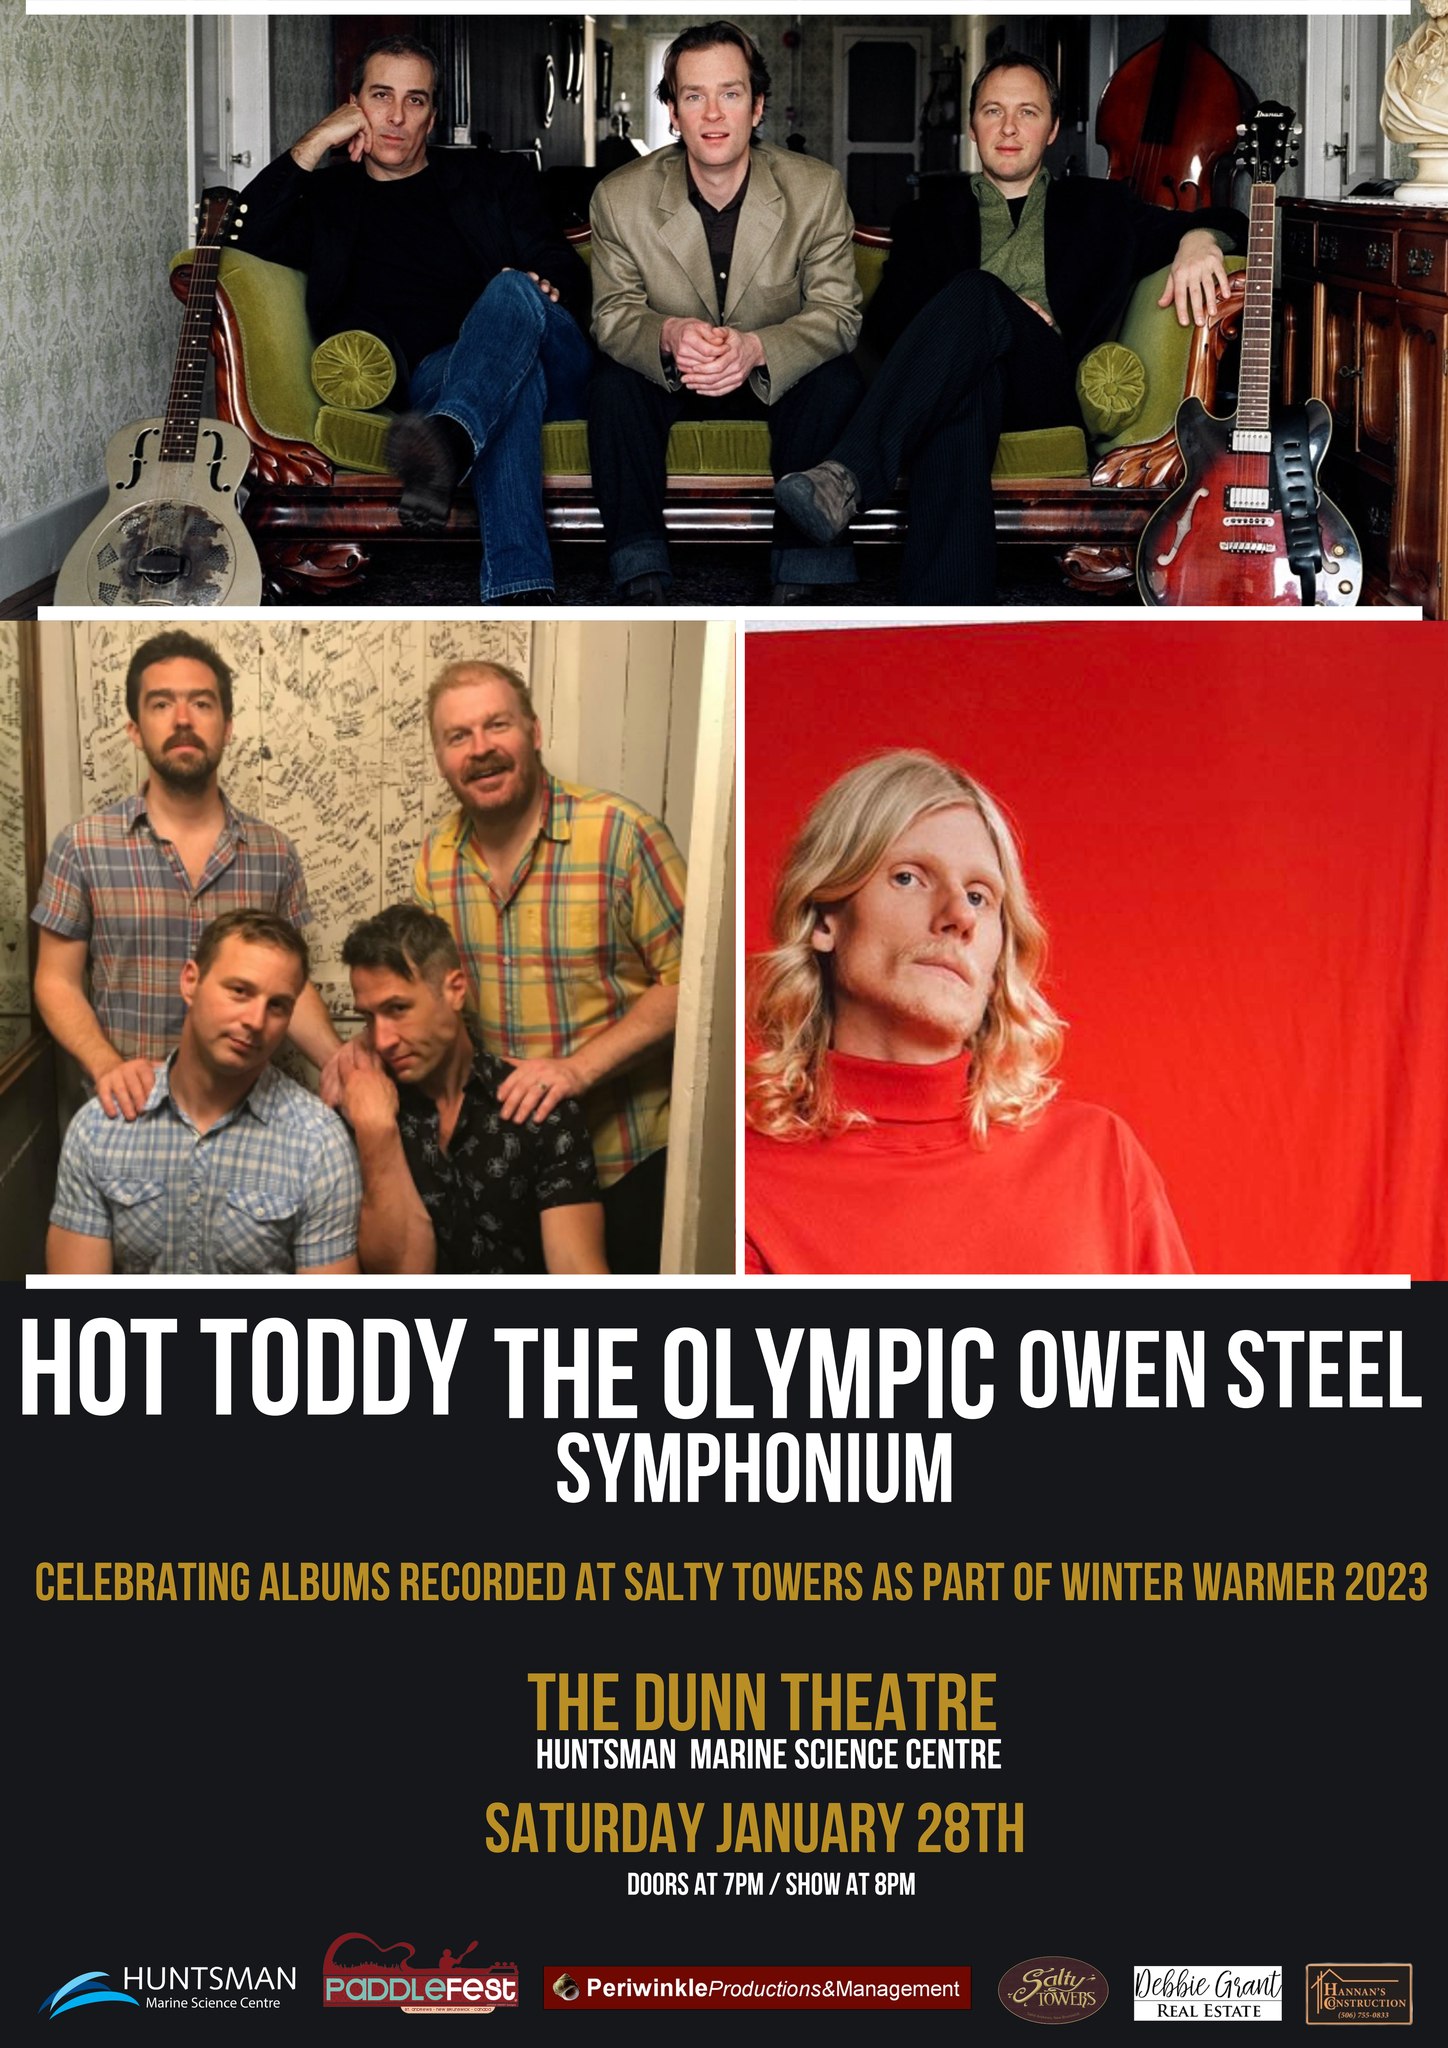 Hot Toddy, The Olympic Symphonium, and Owen Steel. Celebrating albums recorded at Salty Towers as part of Winter Warmer 2023. The Dunn Theatre, Huntsman Marine Science Centre. Saturday, January 28th, Doors at 7 pm, Show. at 8 pm